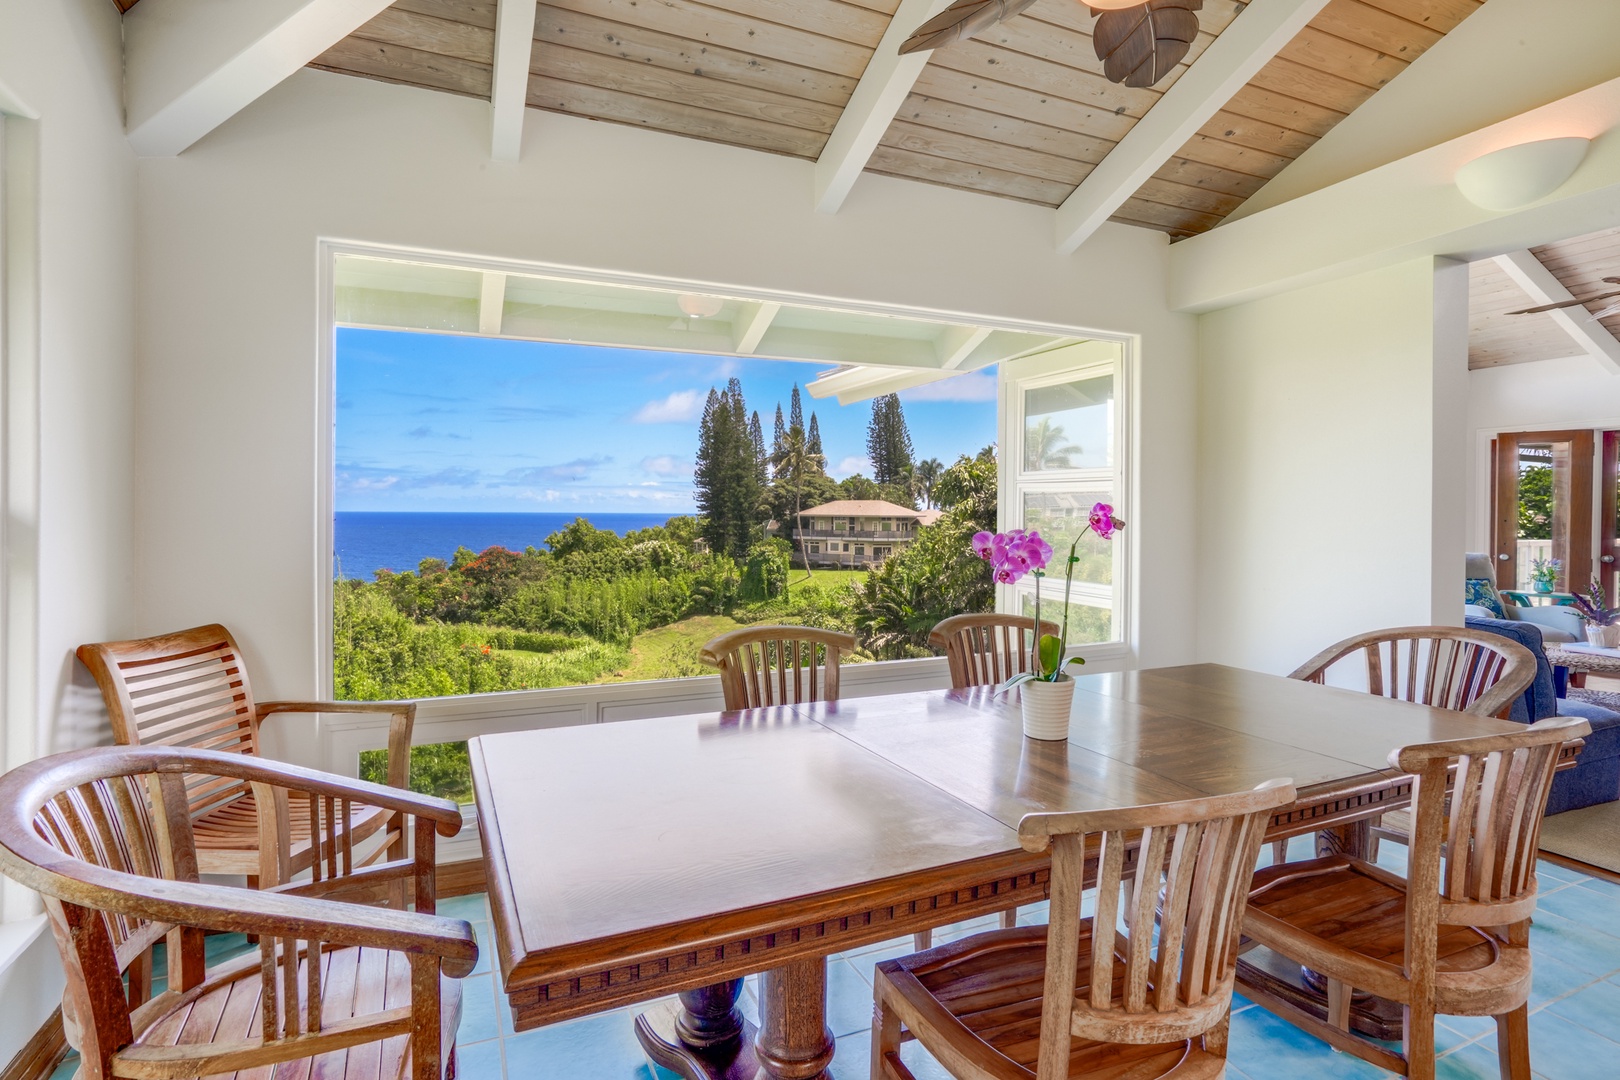 Princeville Vacation Rentals, Wai Lani - Elevate your dining experience to new heights with our stunning panoramic views.